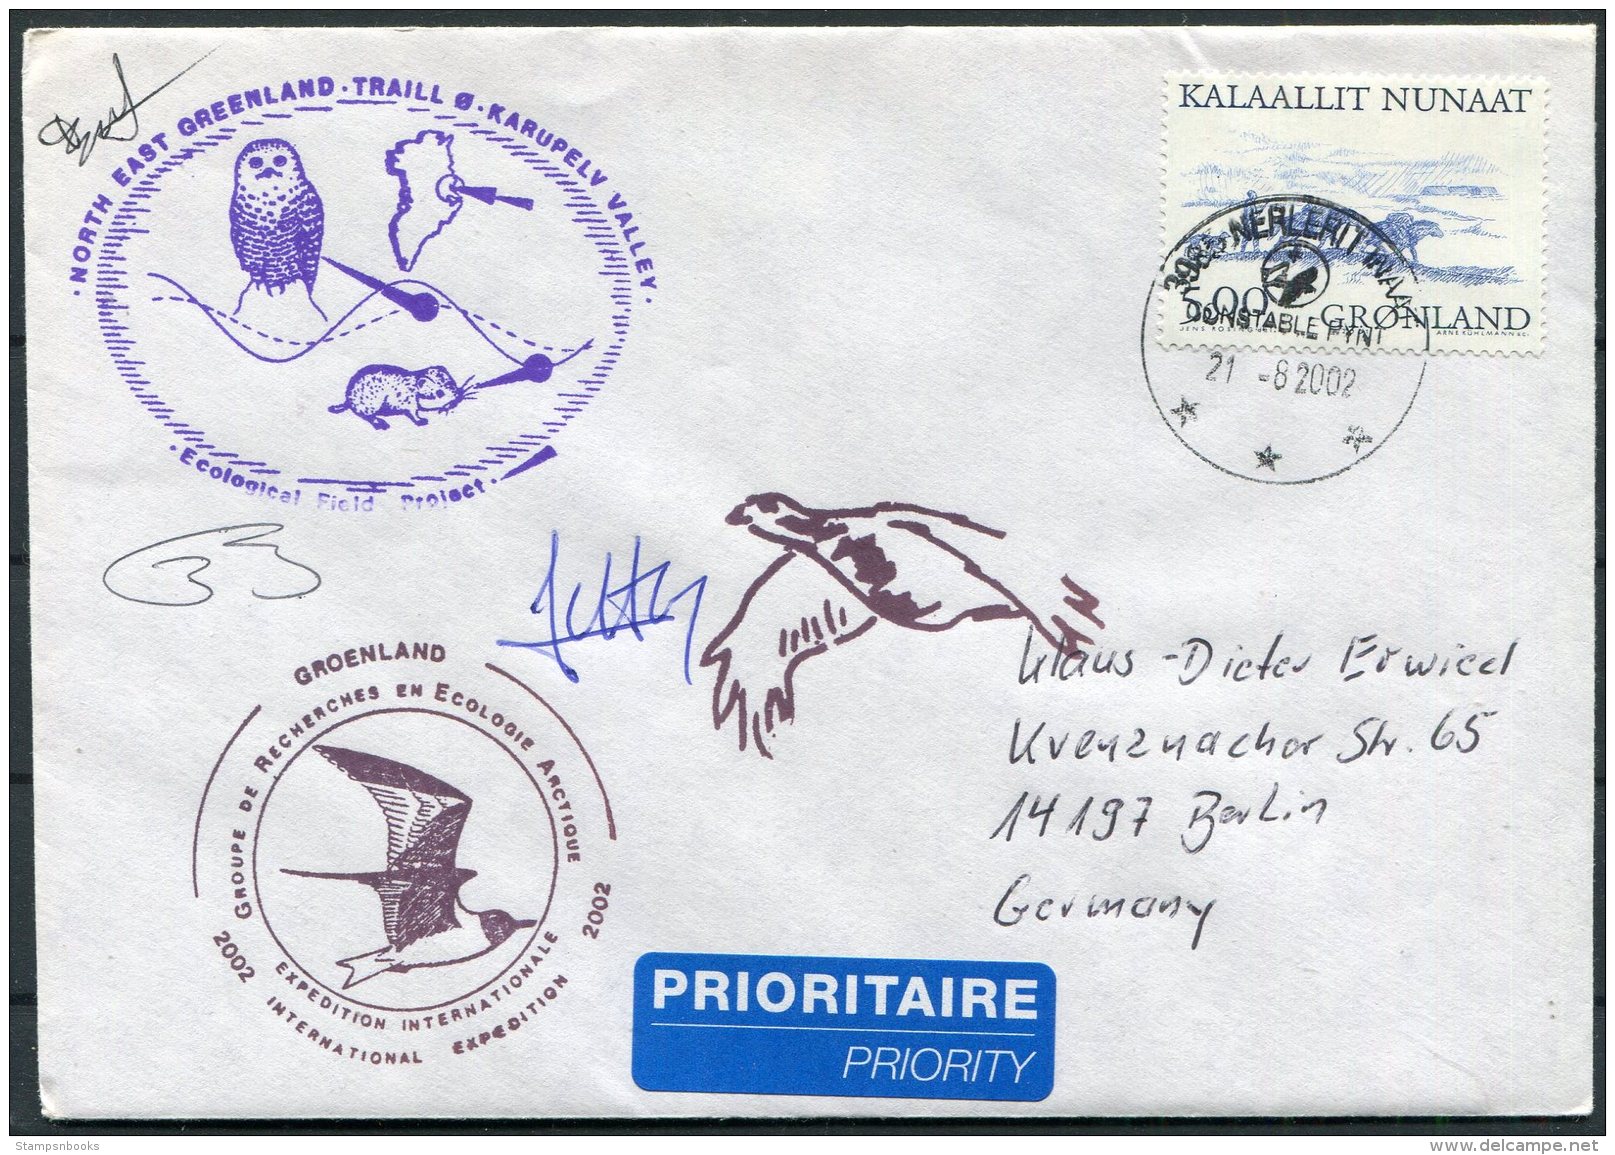 2002 North East Greenland, Karupelv Valley, Polar Owl Birds Research Arctic Expedition Signed Cover - Briefe U. Dokumente